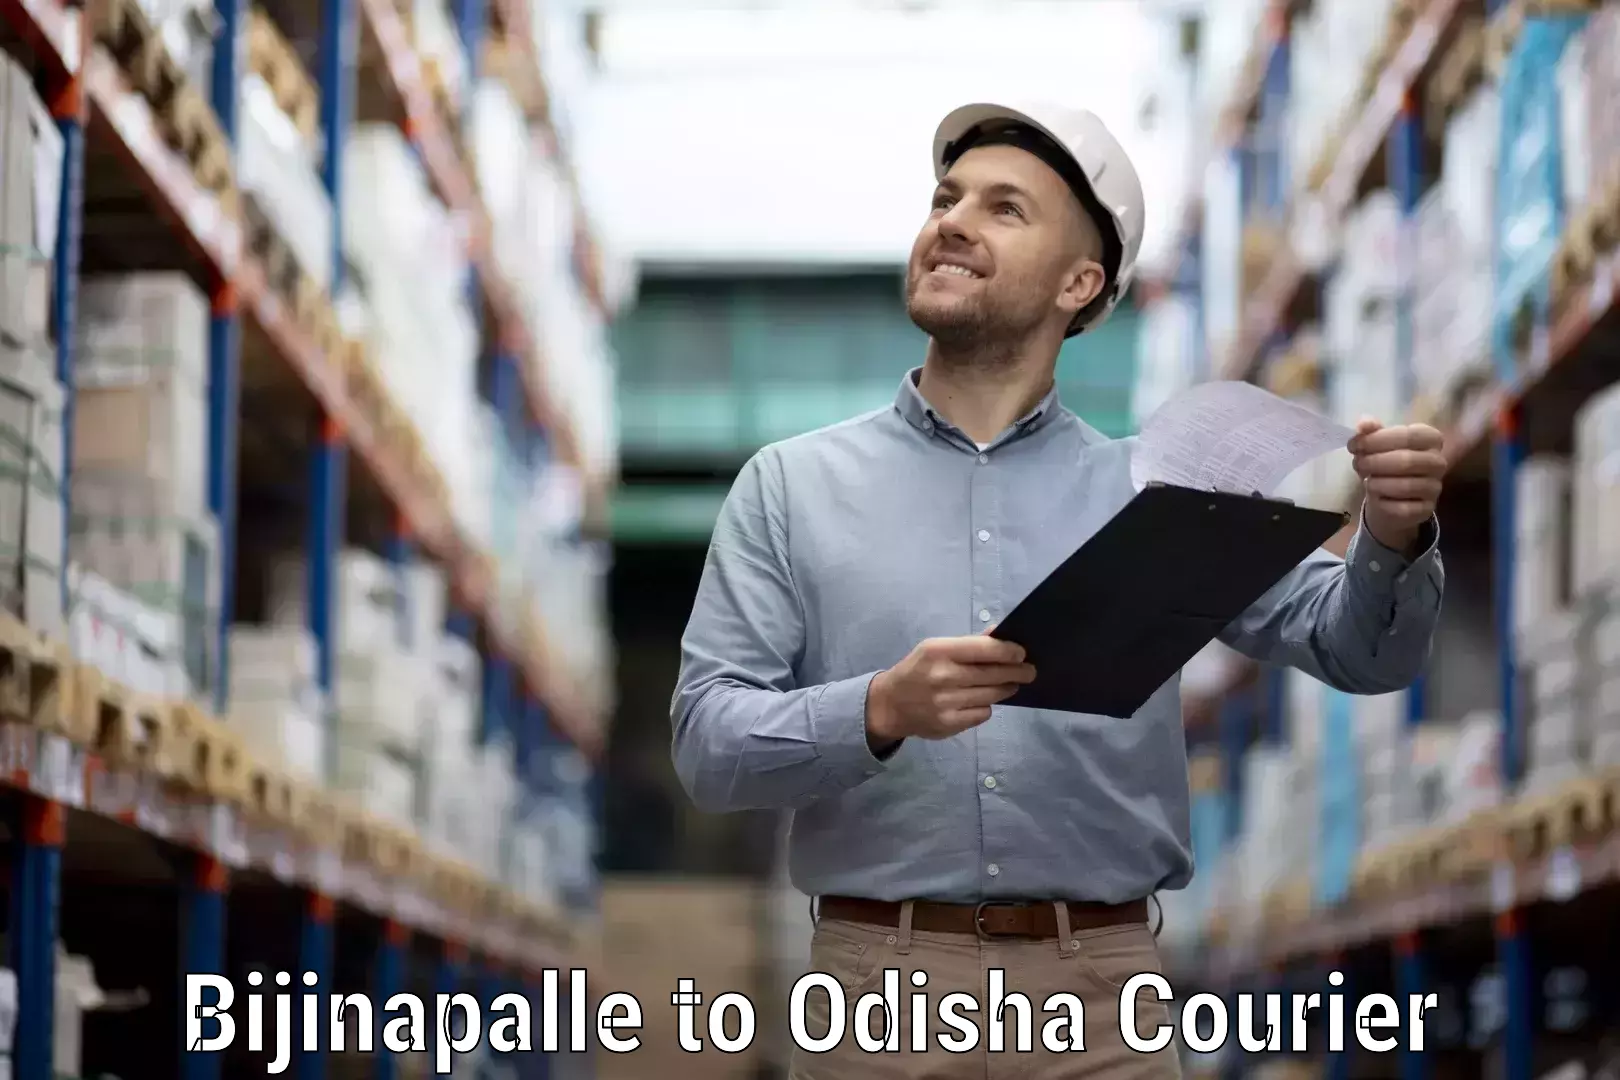 Subscription-based courier Bijinapalle to Mathili